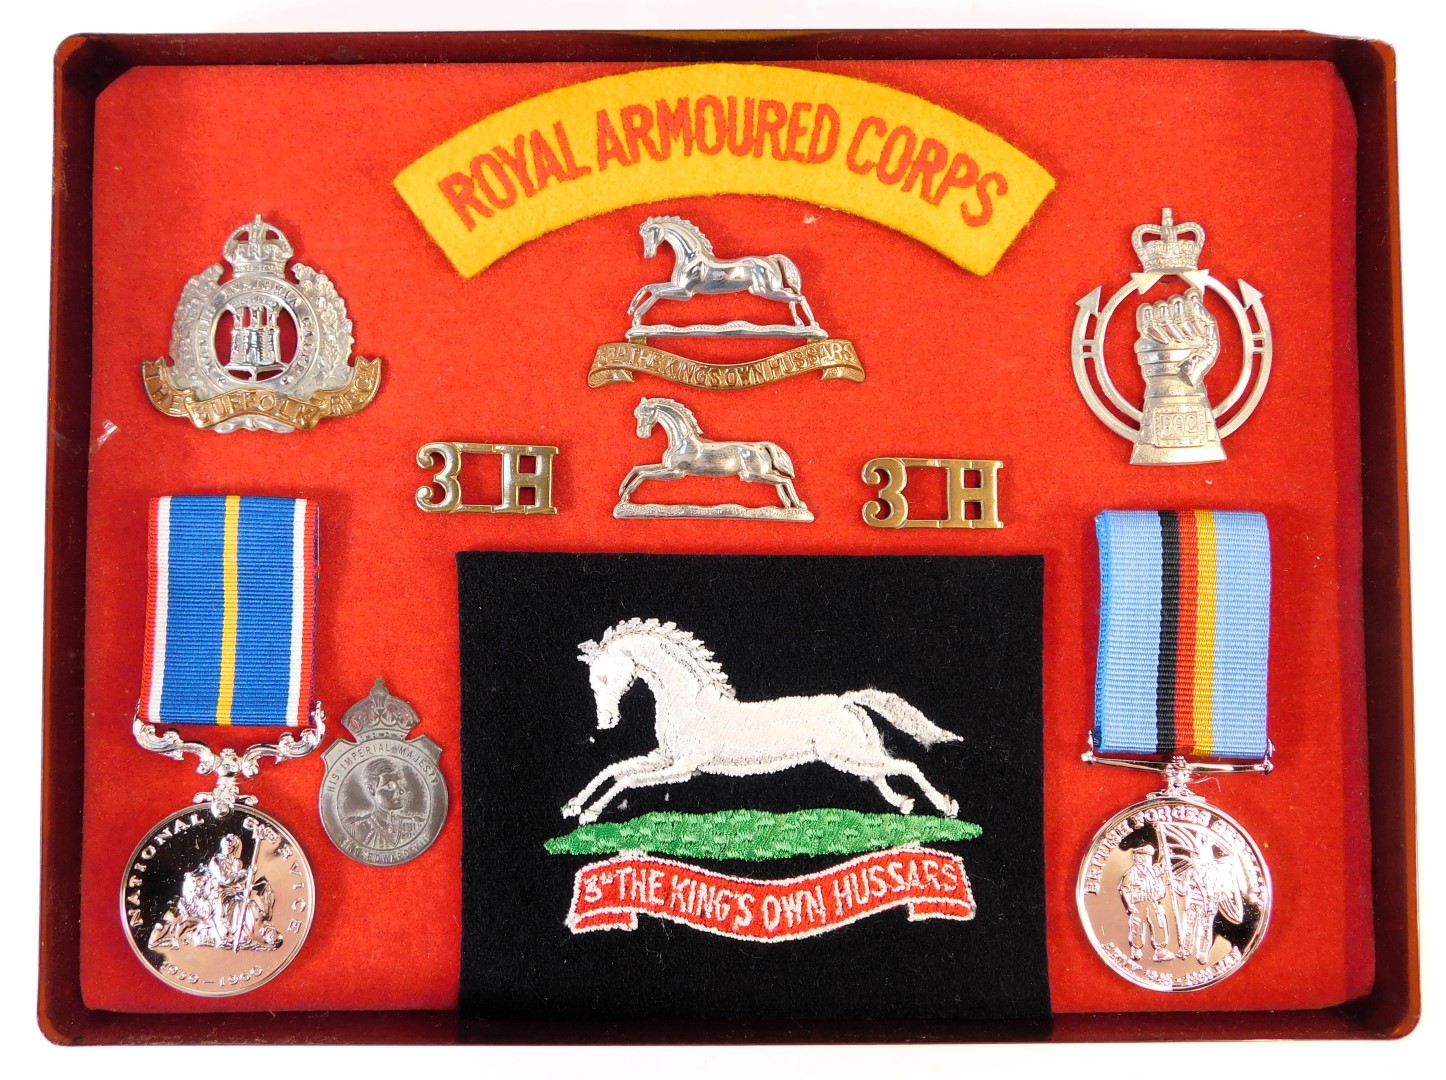 A group of military cloth badges and related items, for Royal Armoured Corps, 3rd Kings Own Hussars, - Image 2 of 4